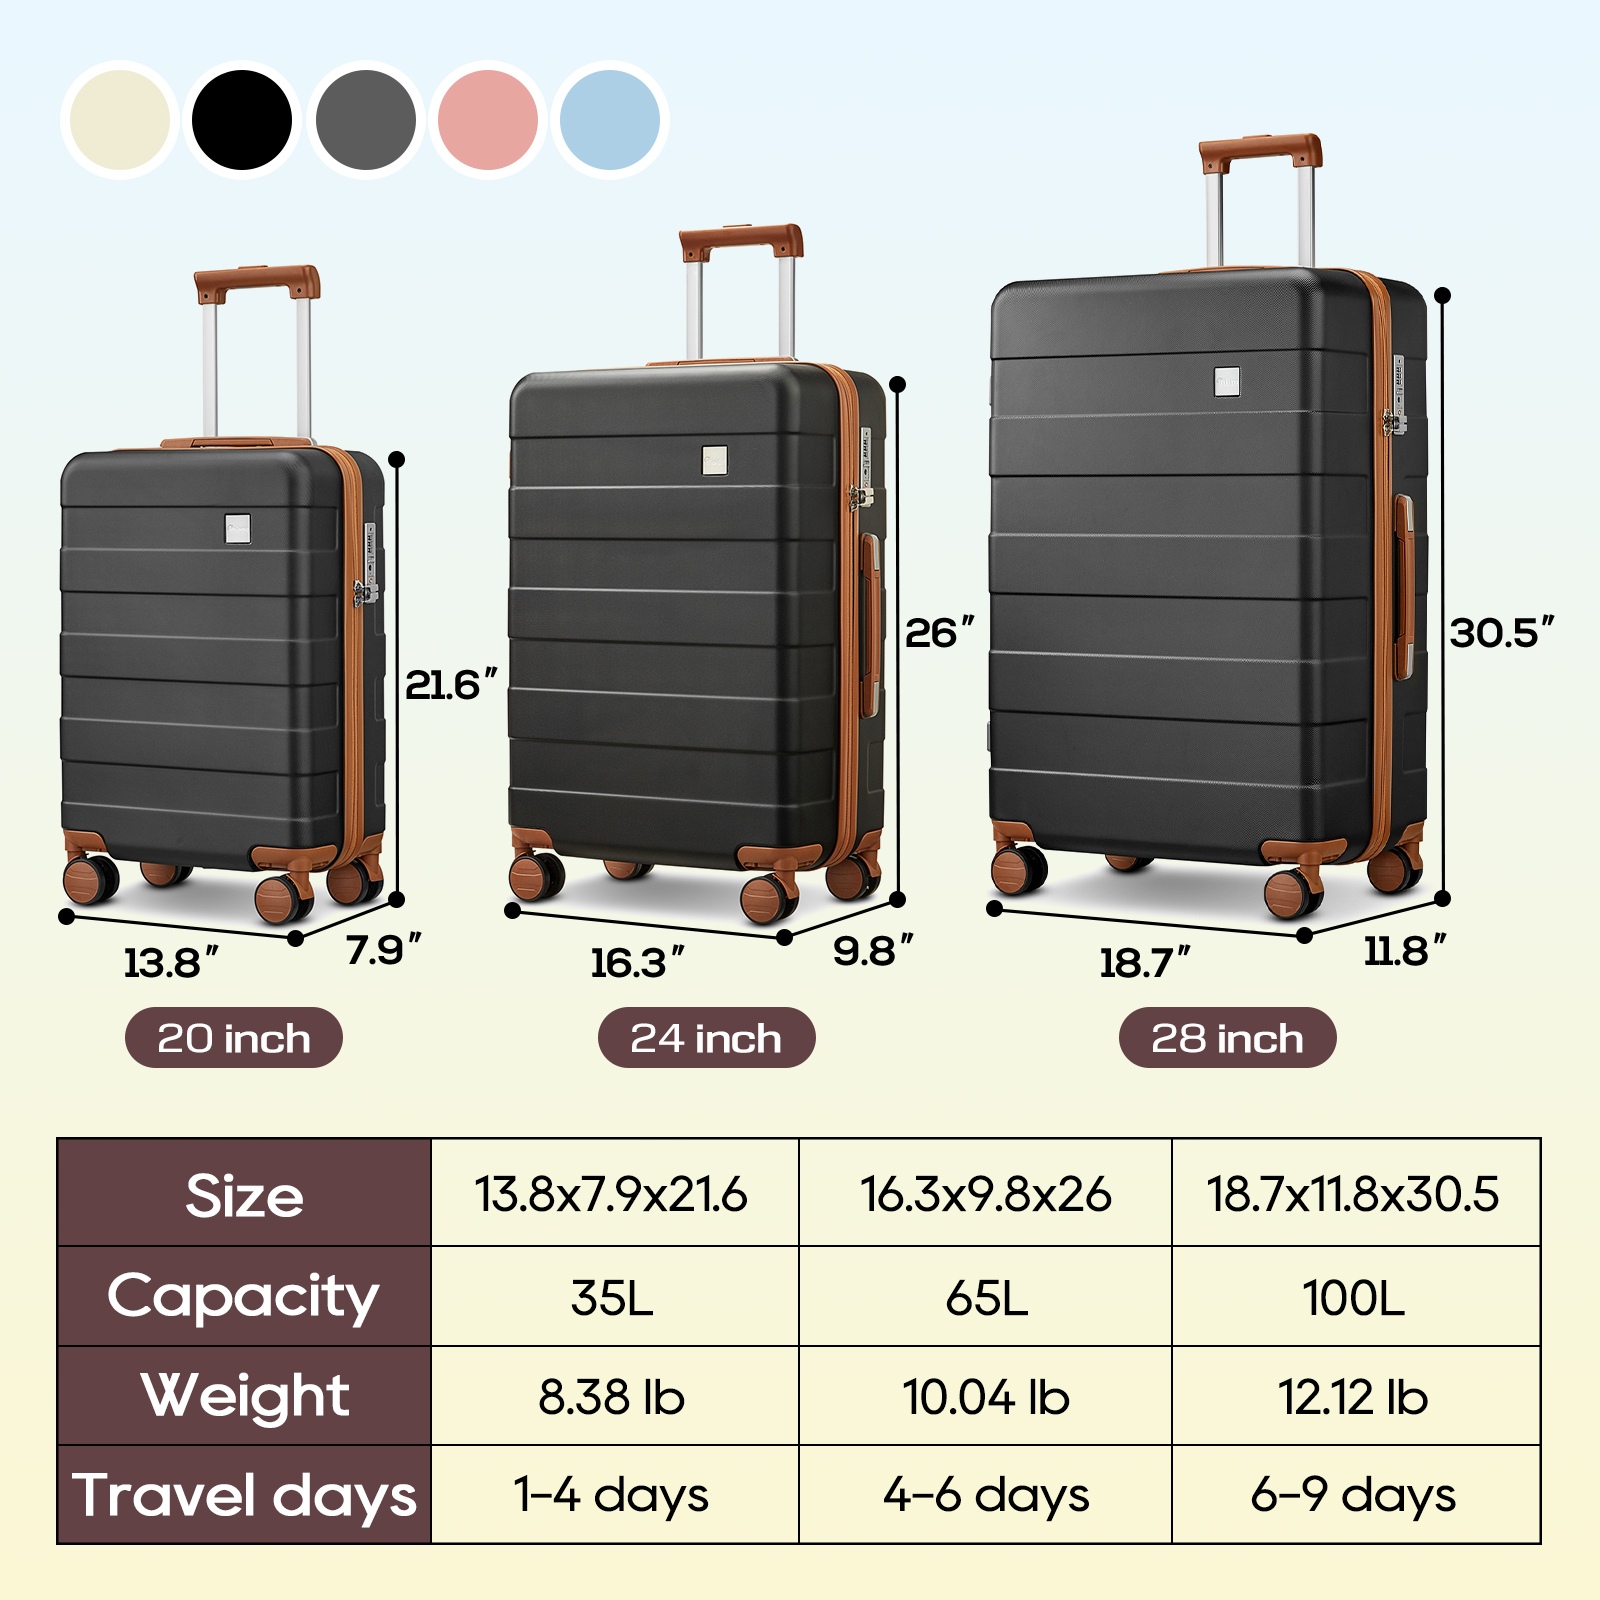 imiomo Luggage, ABS Hard Luggage Set with Spinner Wheels, with TSA Lock, Lightweight and Durable (Unisex) - image 2 of 7